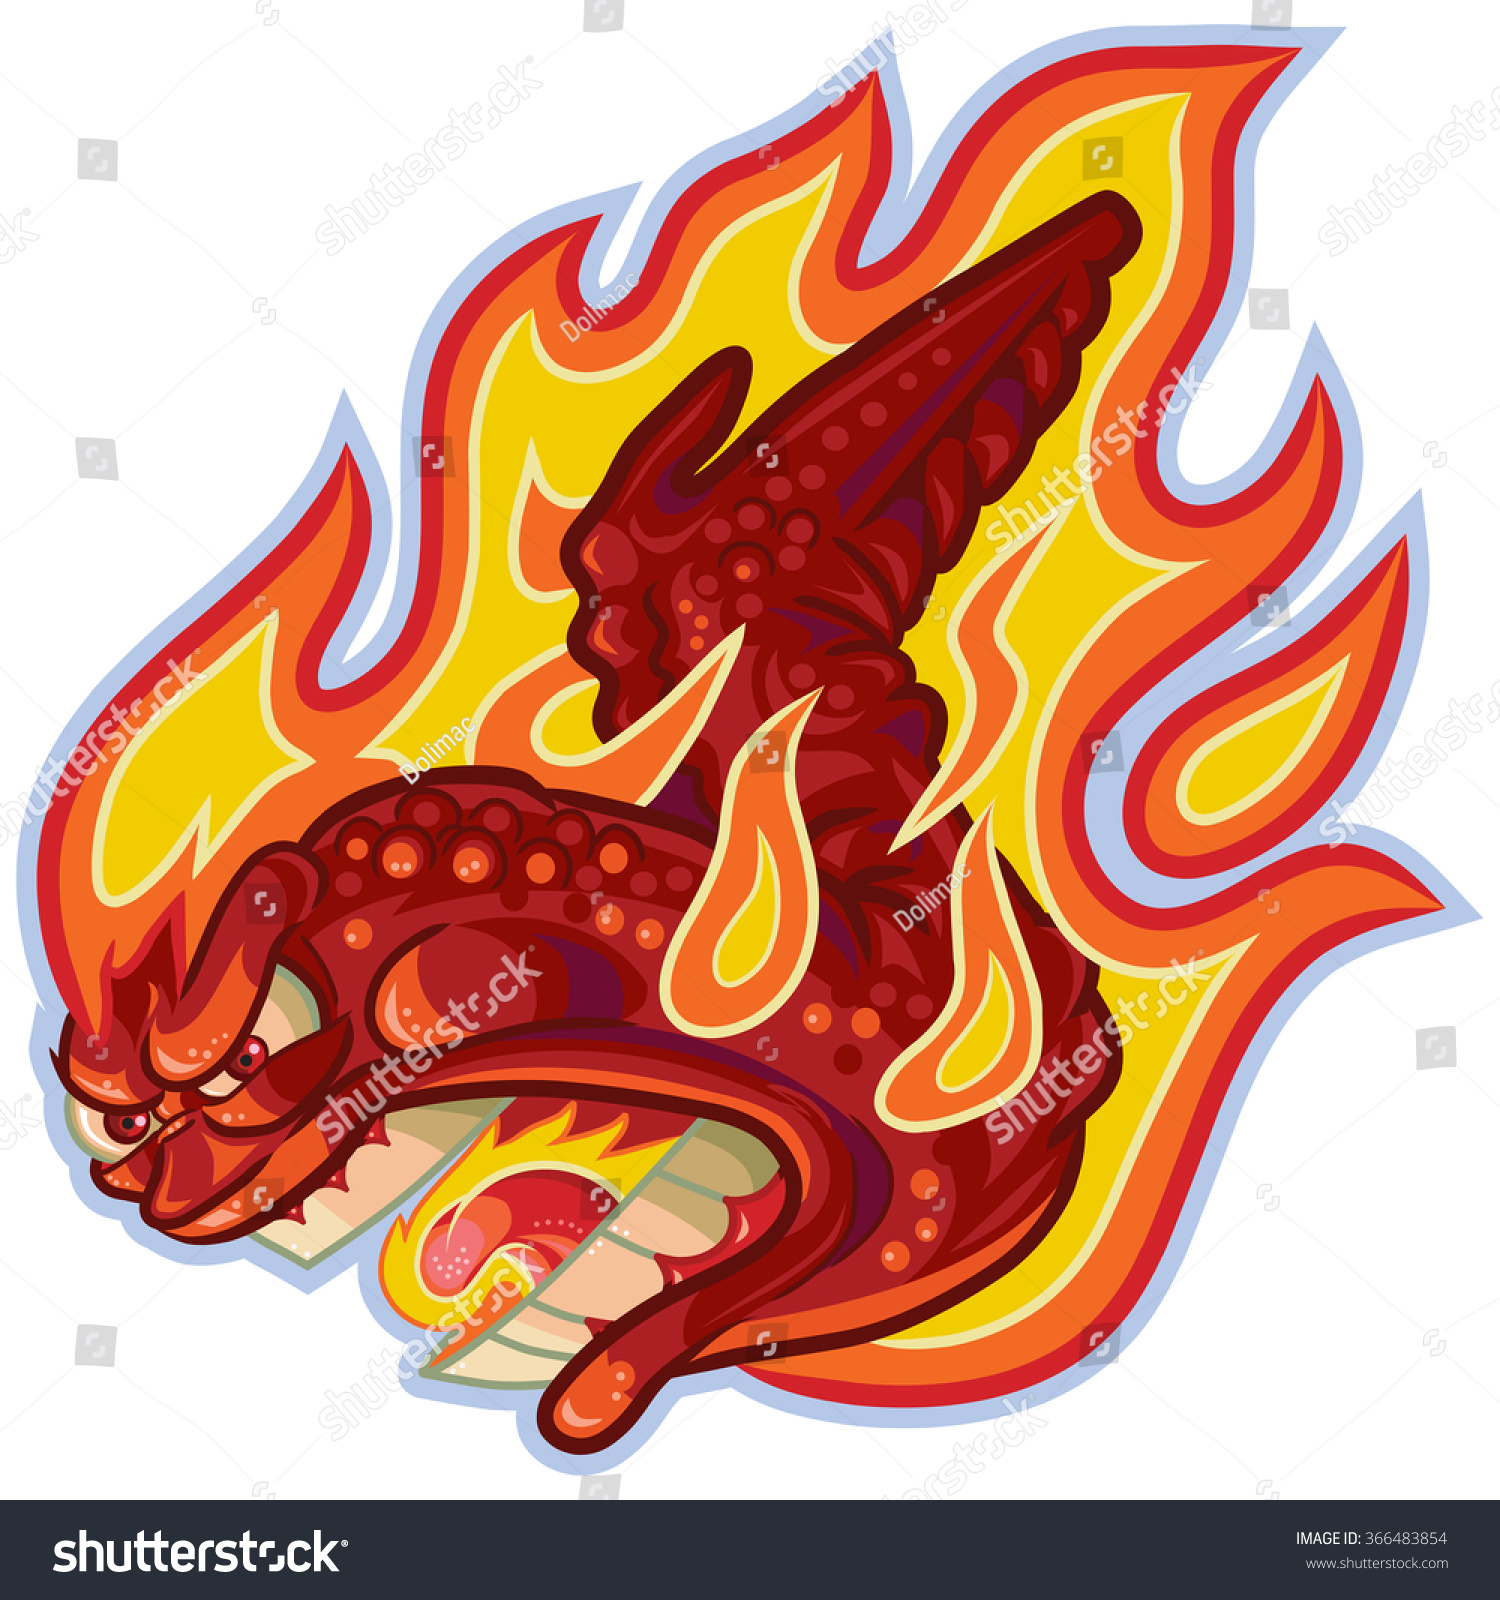 heartofmetal is censored = communism Stock-vector-vector-cartoon-clip-art-illustration-of-an-angry-buffalo-or-hot-chicken-wing-on-fire-or-in-flames-366483854